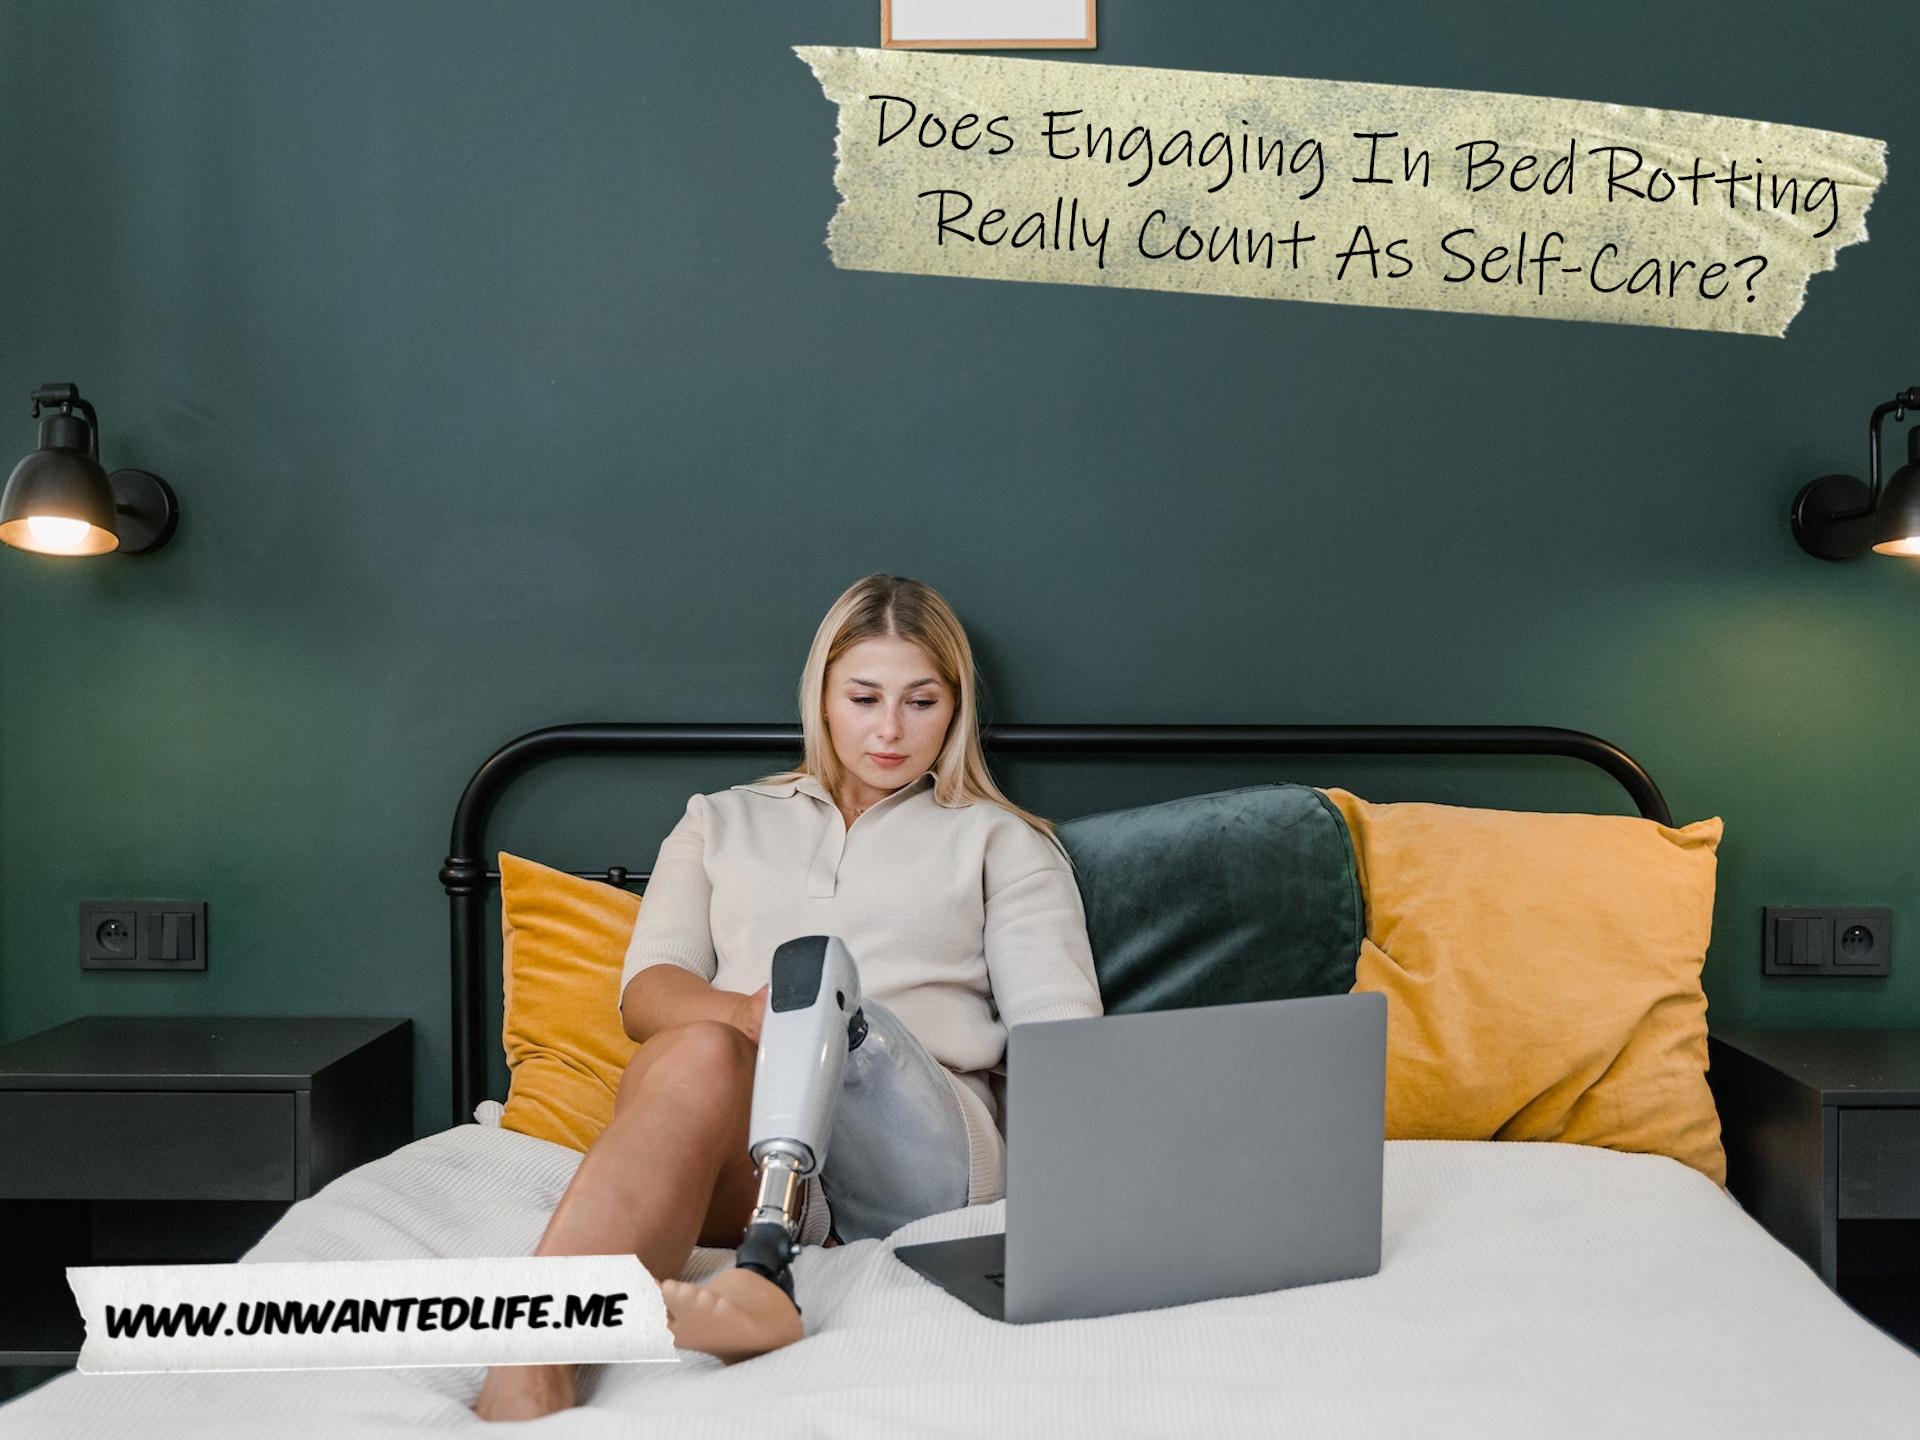 A White woman with a prosthetic leg looking at her laptop in bed to represent the topic of the article - Does Engaging In Bed Rotting Really Count As Self-Care?